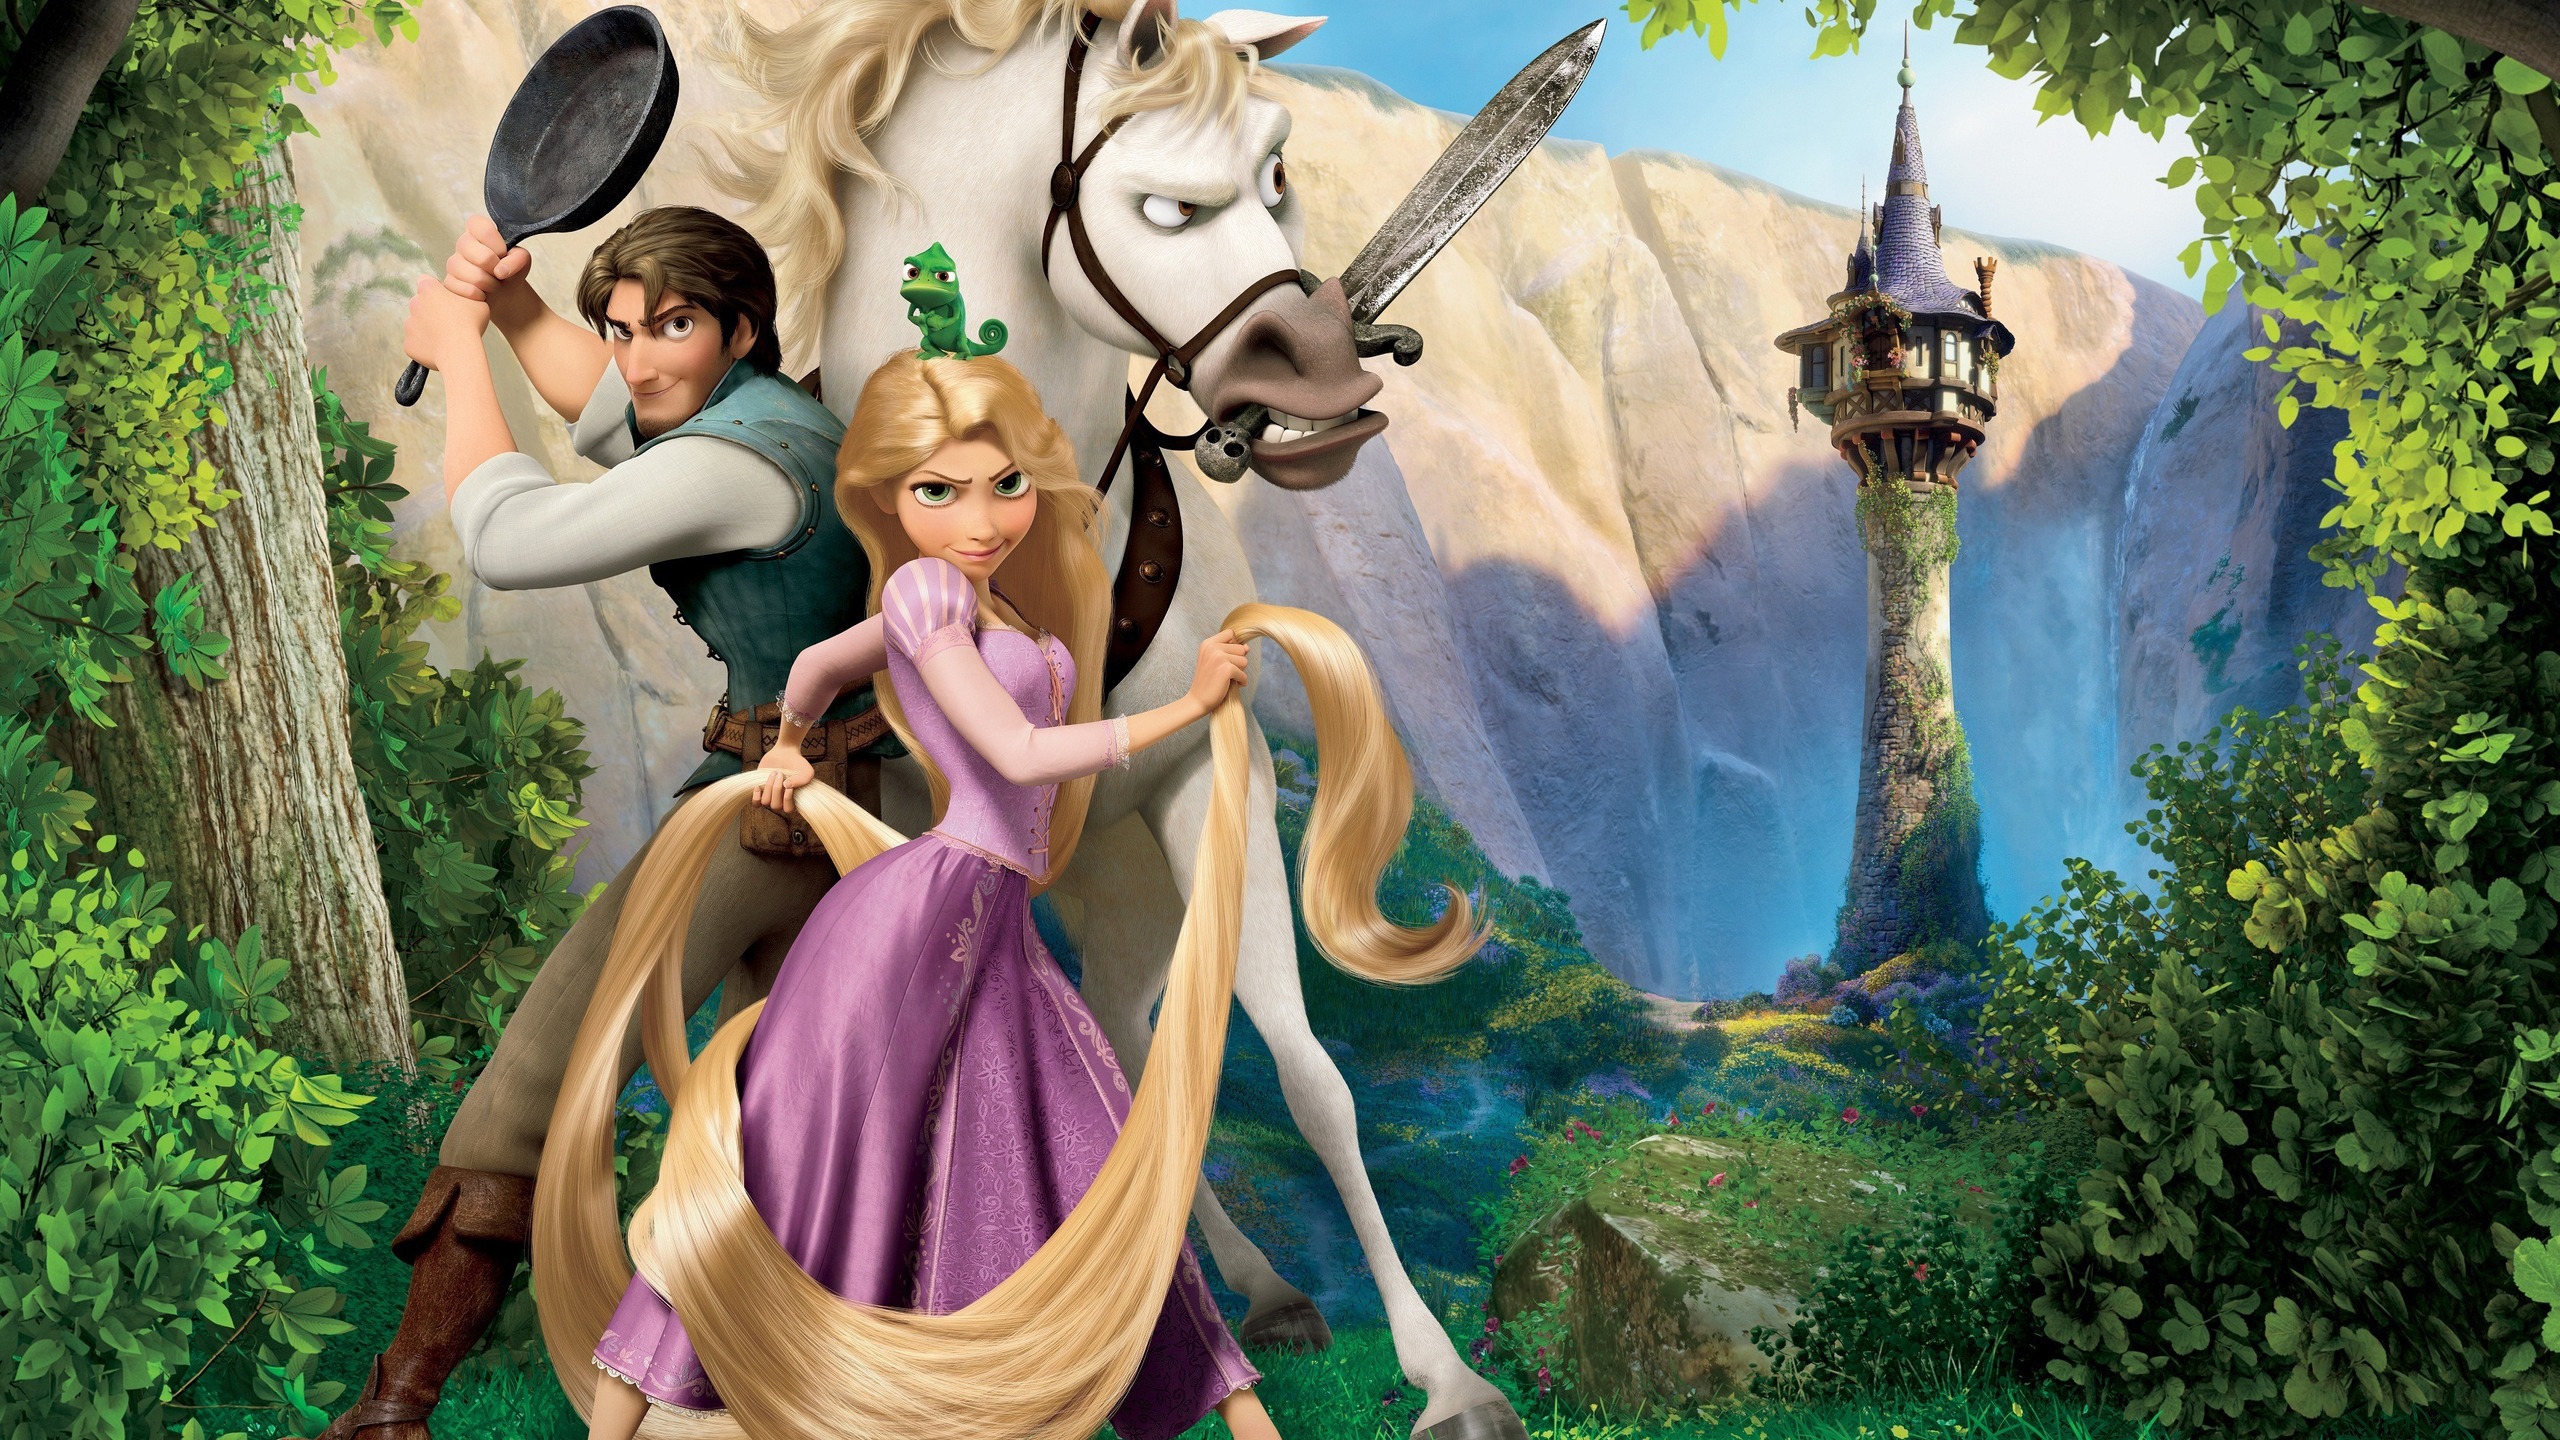 Tangled Animated Musical Film for 2560x1440 HDTV resolution